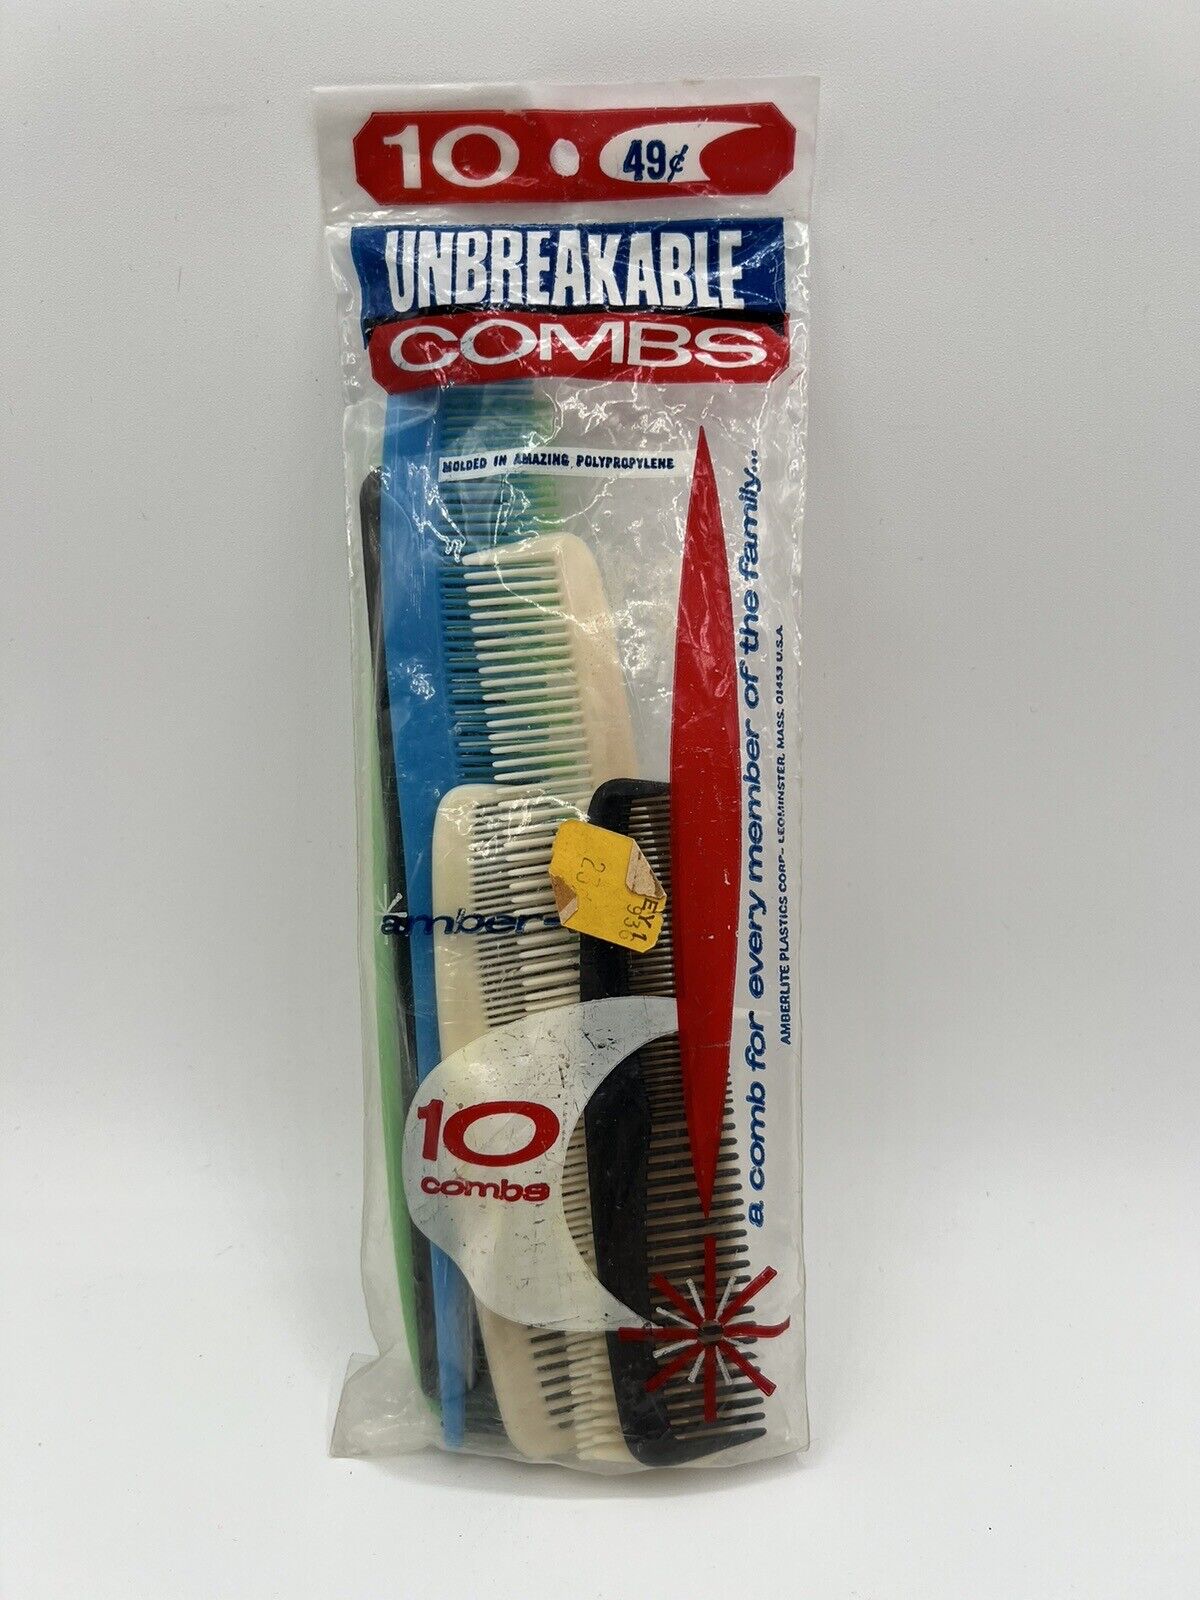 Vintage Amberlite Unbreakable Combs 10 Pack Sealed NOS Assorted Sizes Colors